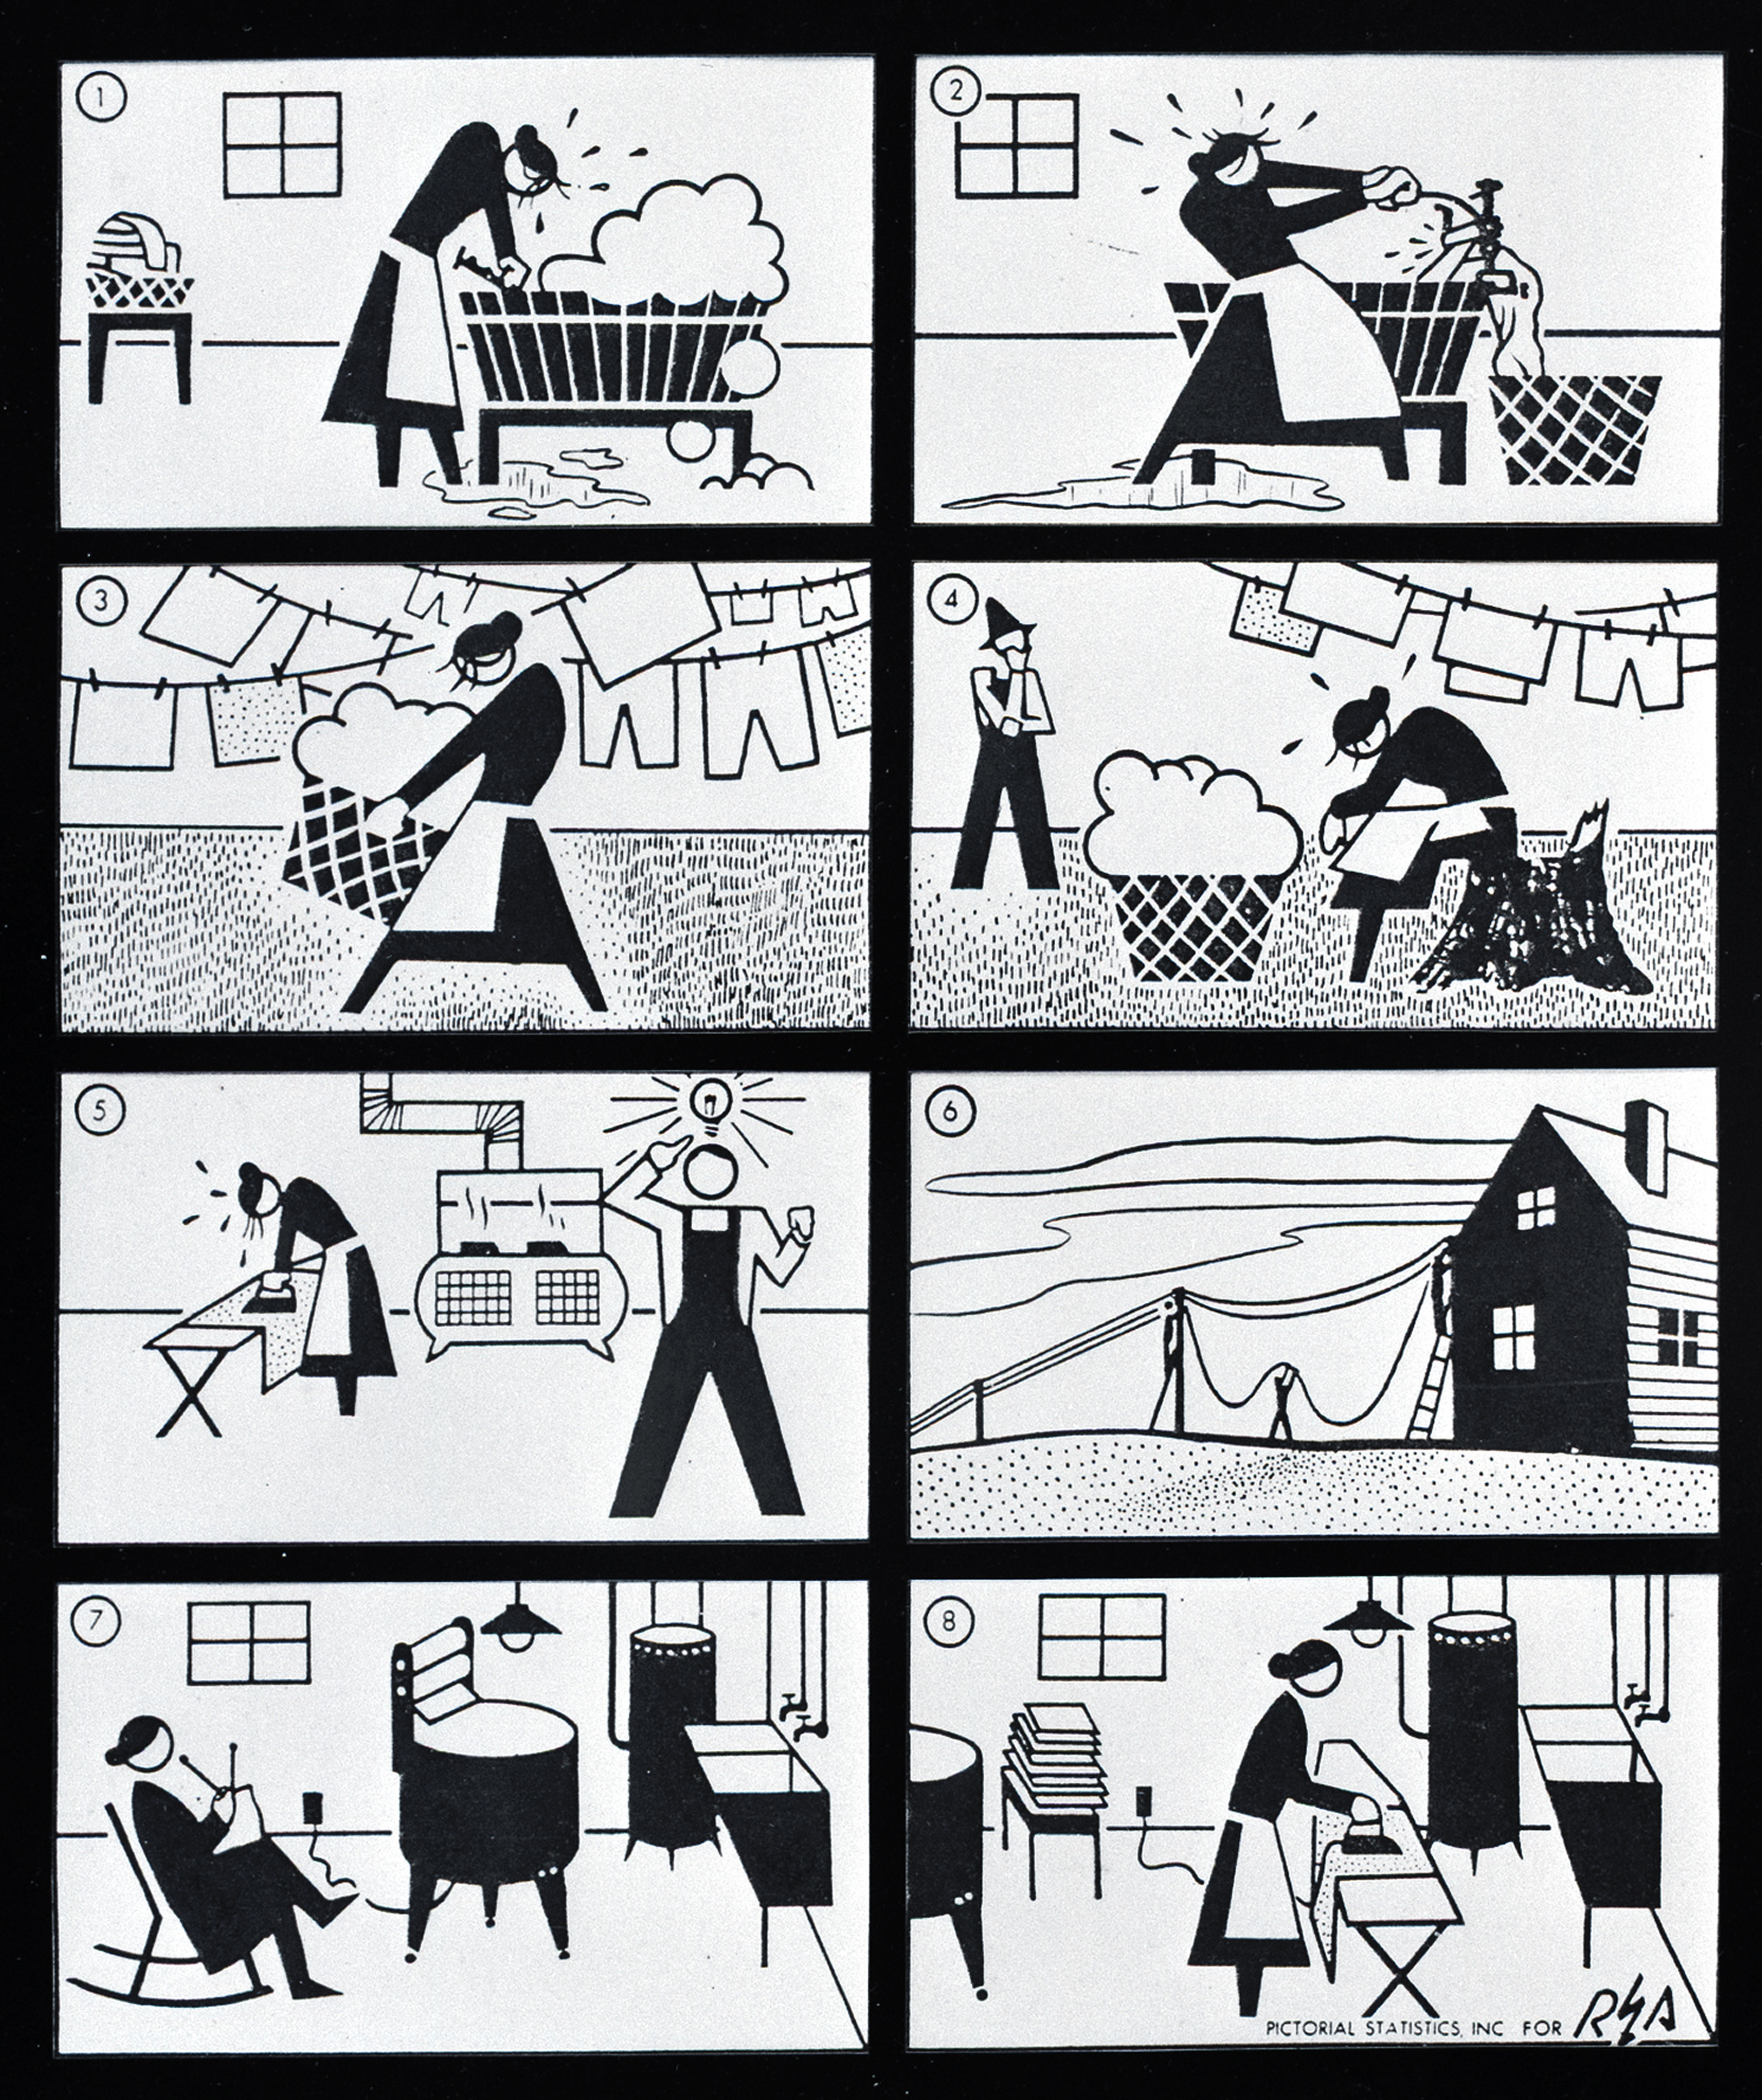 Simple comic strip from the Rural Electrification Administration showing how the addition of electricity to the farm home can save the housewife from days of backbreaking labor.  Source: "The Next Greatest Thing," published by NRECA